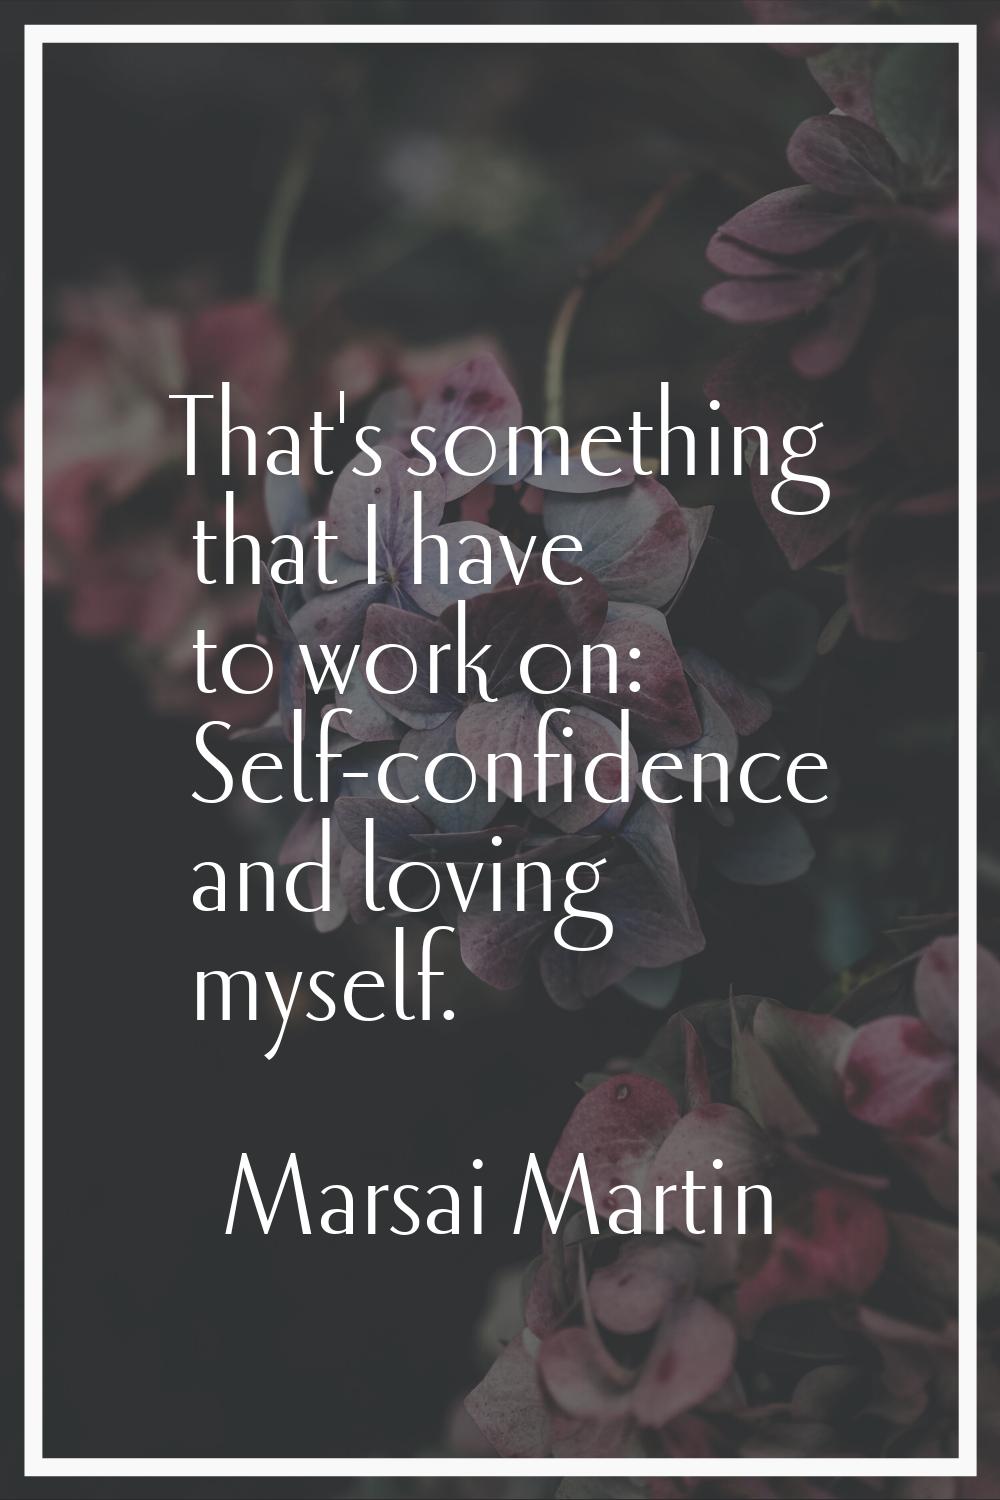 That's something that I have to work on: Self-confidence and loving myself.